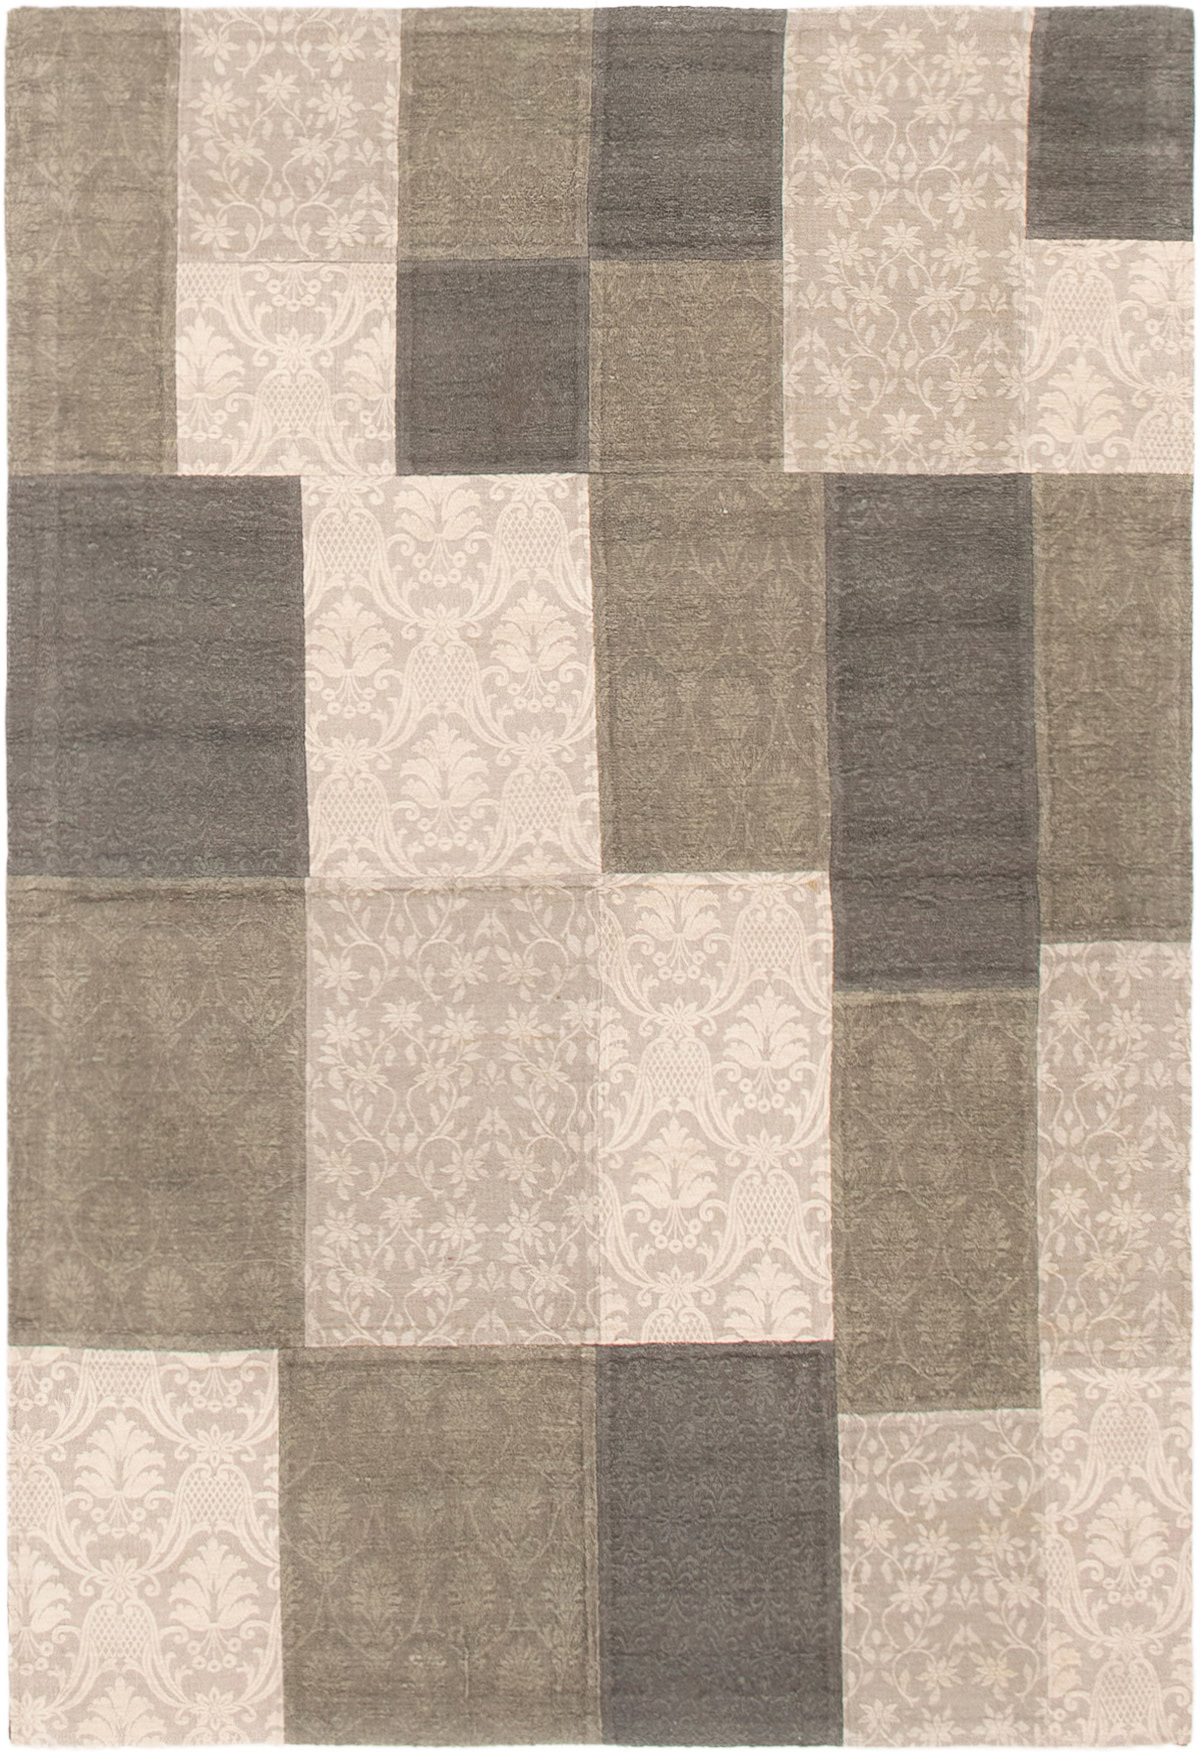 Handmade Collage Grey, Ivory Chenille Rug 3'11" x 6'0" Size: 3'11" x 6'0"  